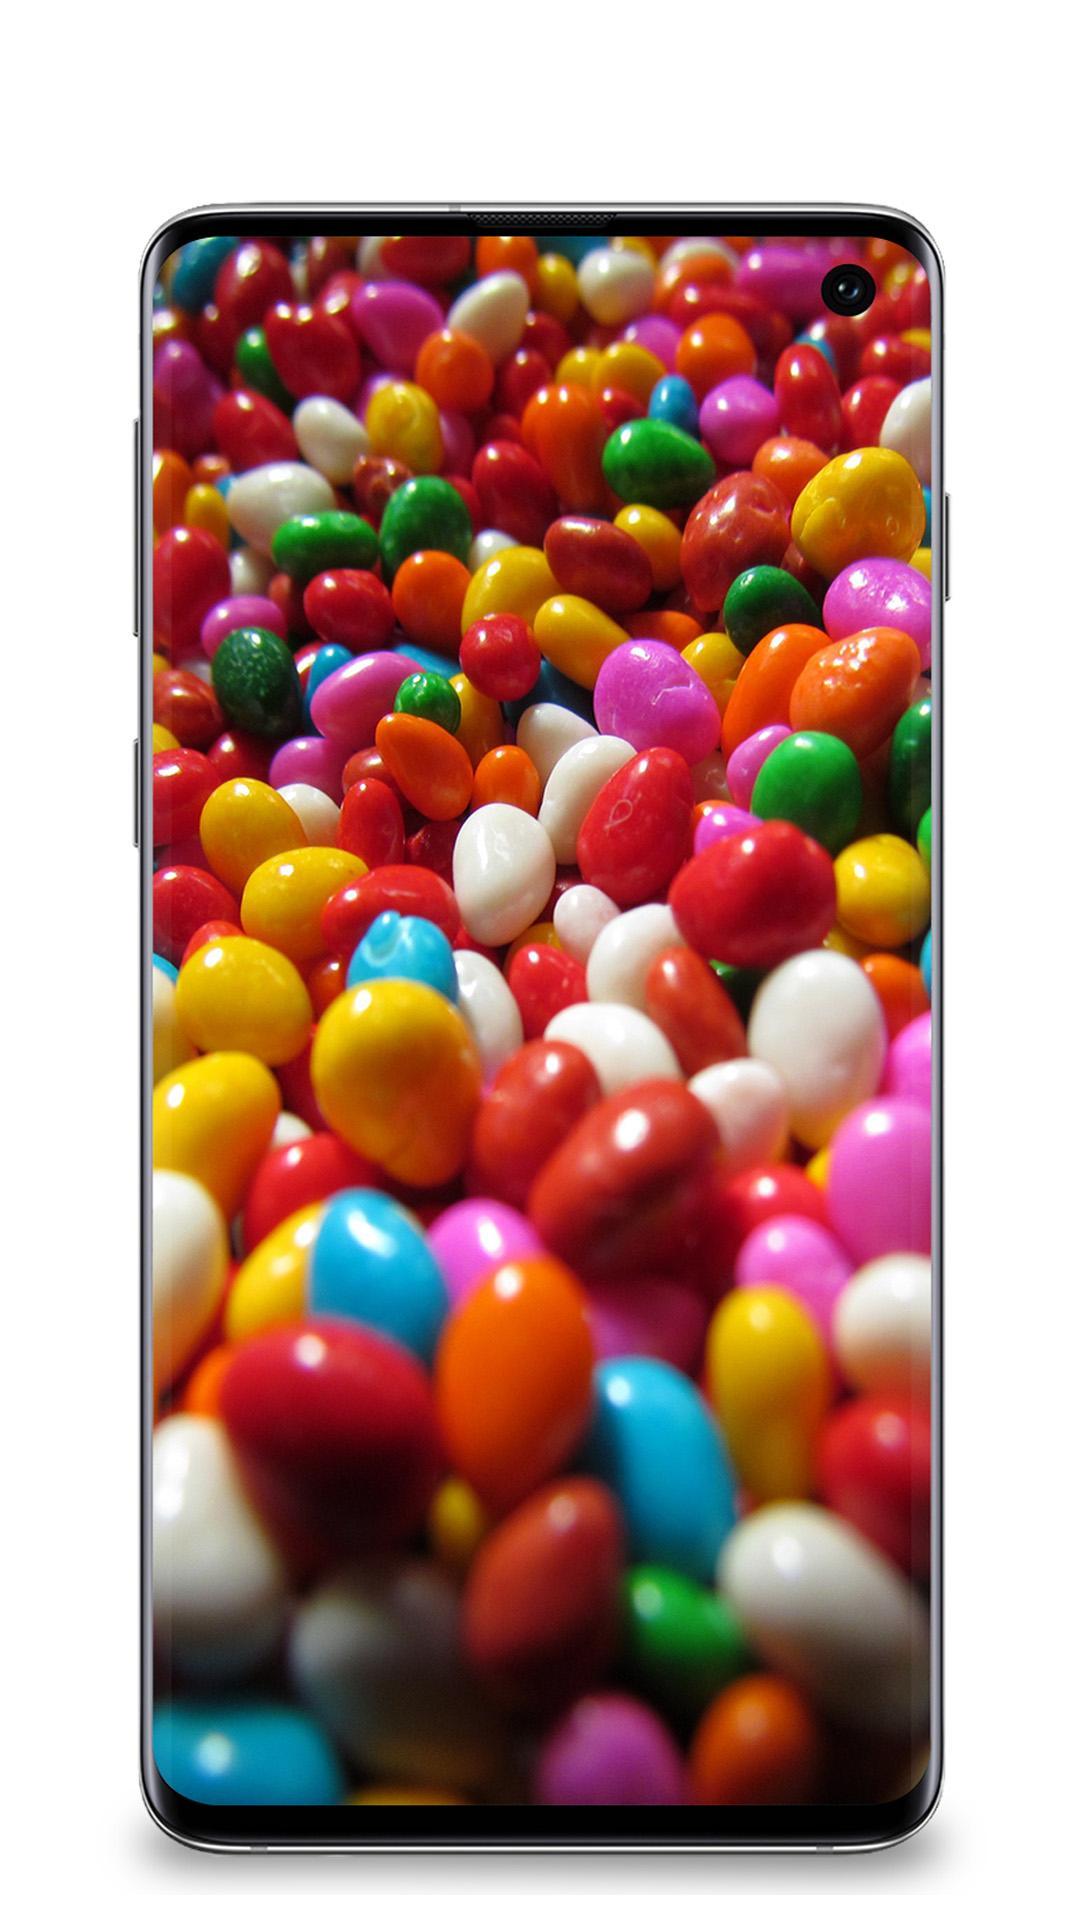 Candy Wallpapers Hd For Android Apk Download Images, Photos, Reviews